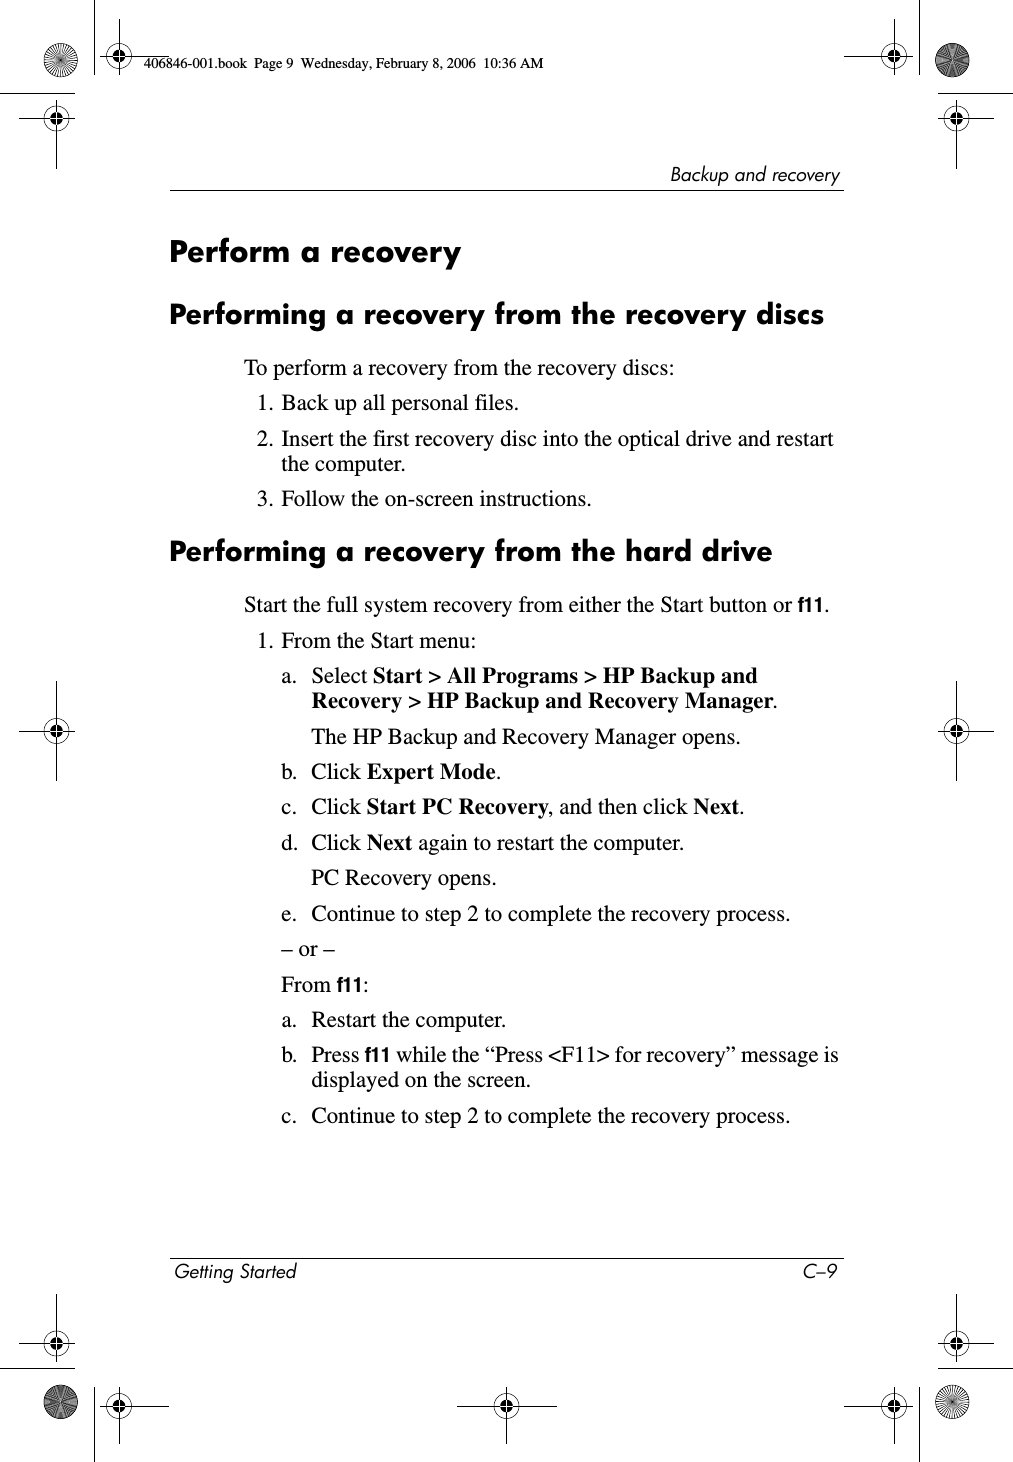 Backup and recoveryGetting Started C–9Perform a recoveryPerforming a recovery from the recovery discsTo perform a recovery from the recovery discs: 1. Back up all personal files. 2. Insert the first recovery disc into the optical drive and restart the computer.3. Follow the on-screen instructions. Performing a recovery from the hard driveStart the full system recovery from either the Start button or f11.1. From the Start menu:a. Select Start &gt; All Programs &gt; HP Backup and Recovery &gt; HP Backup and Recovery Manager. The HP Backup and Recovery Manager opens.b. Click Expert Mode. c. Click Start PC Recovery, and then click Next. d. Click Next again to restart the computer. PC Recovery opens.e. Continue to step 2 to complete the recovery process.– or –From f11: a. Restart the computer. b. Press f11 while the “Press &lt;F11&gt; for recovery” message is displayed on the screen.c. Continue to step 2 to complete the recovery process. 406846-001.book  Page 9  Wednesday, February 8, 2006  10:36 AM